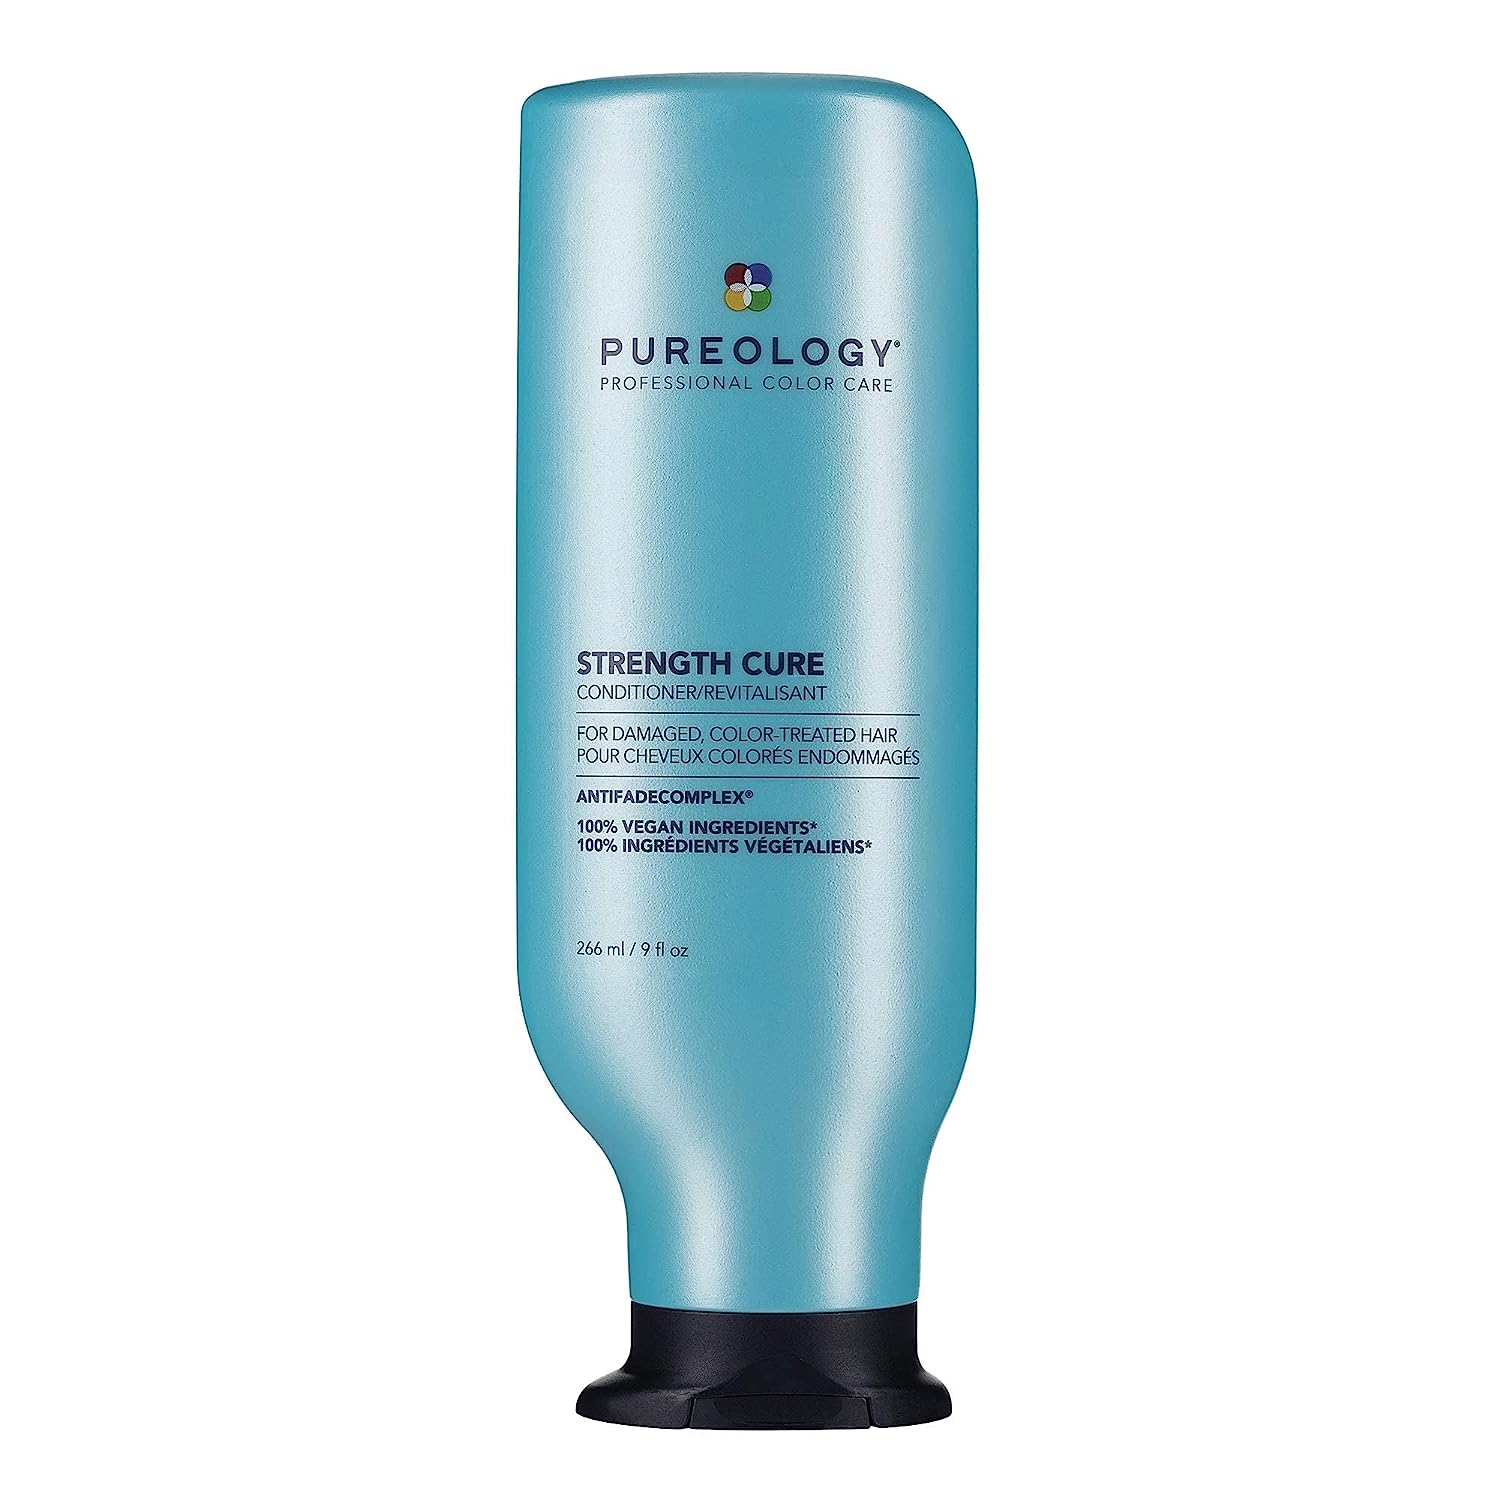 Pureology Strength Cure Conditioner | For Damaged, [...]